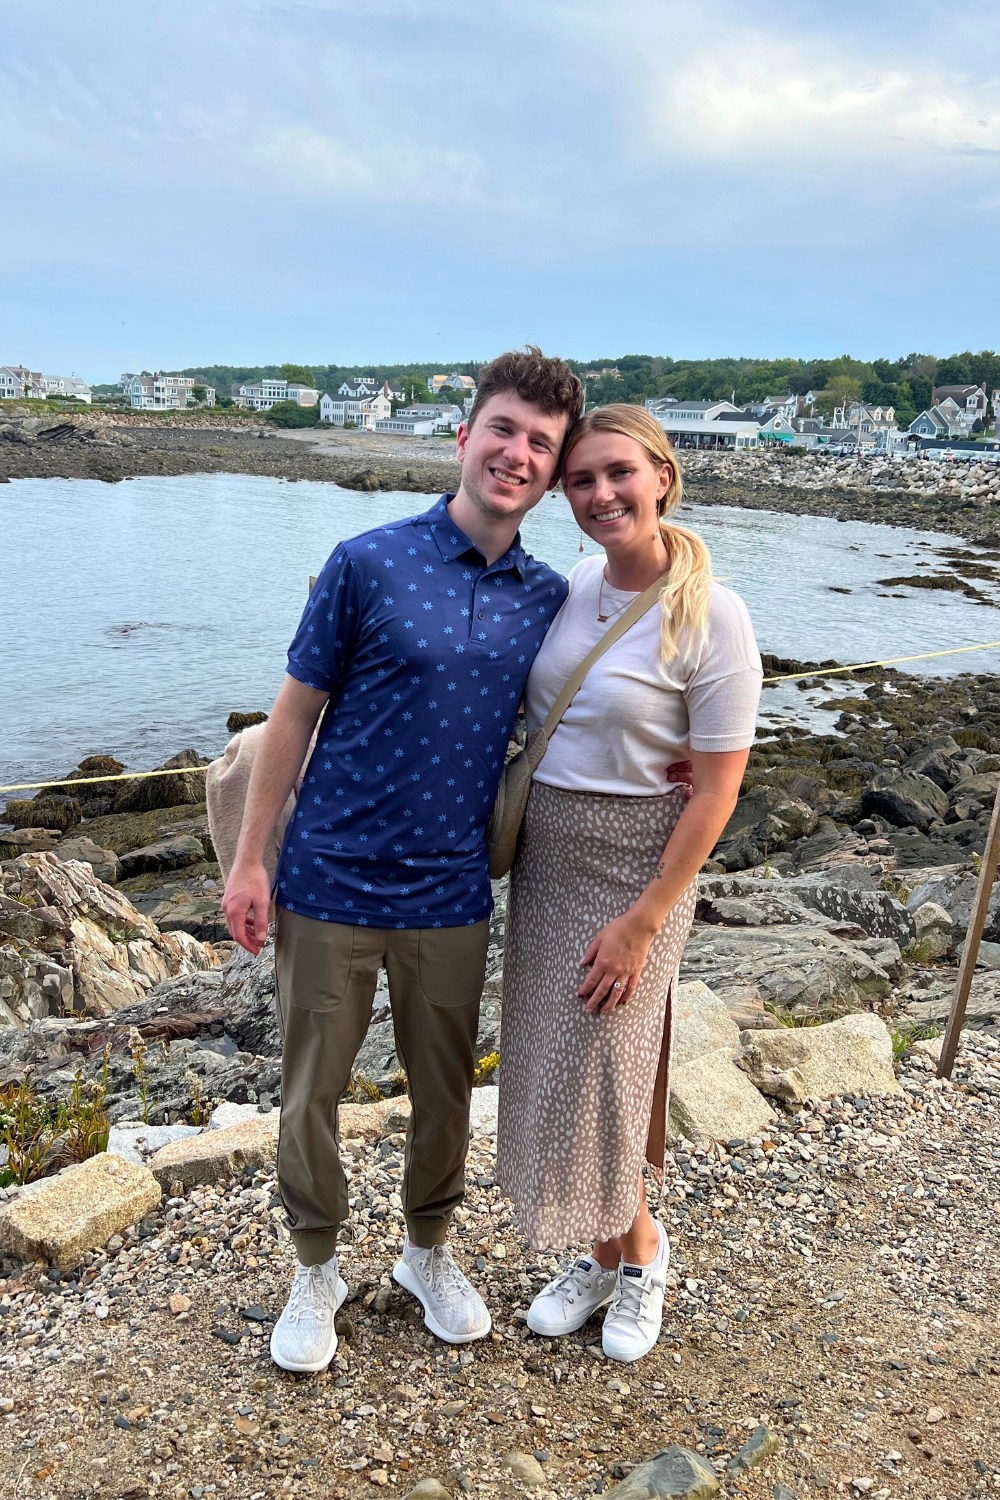 A man and a woman standing in front of rocks in front of a bay of water.